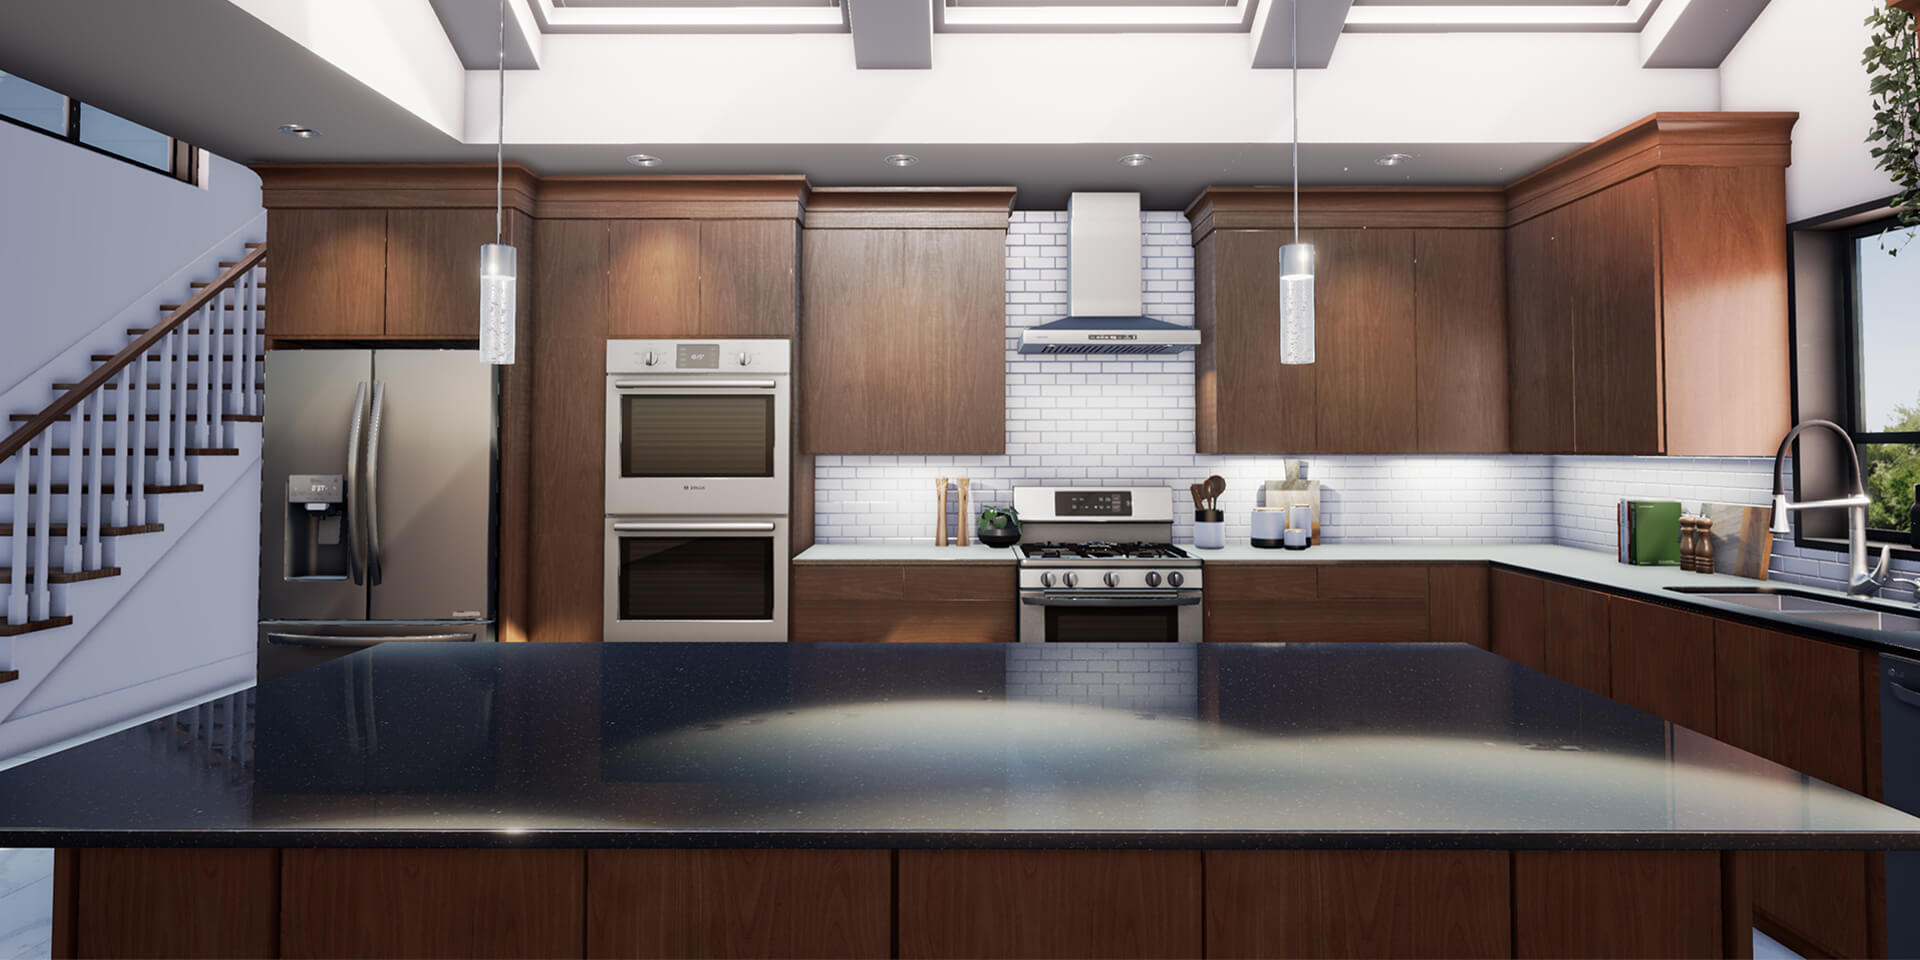 Digitally rendered kitchen with wood cabinets and dark countertops.